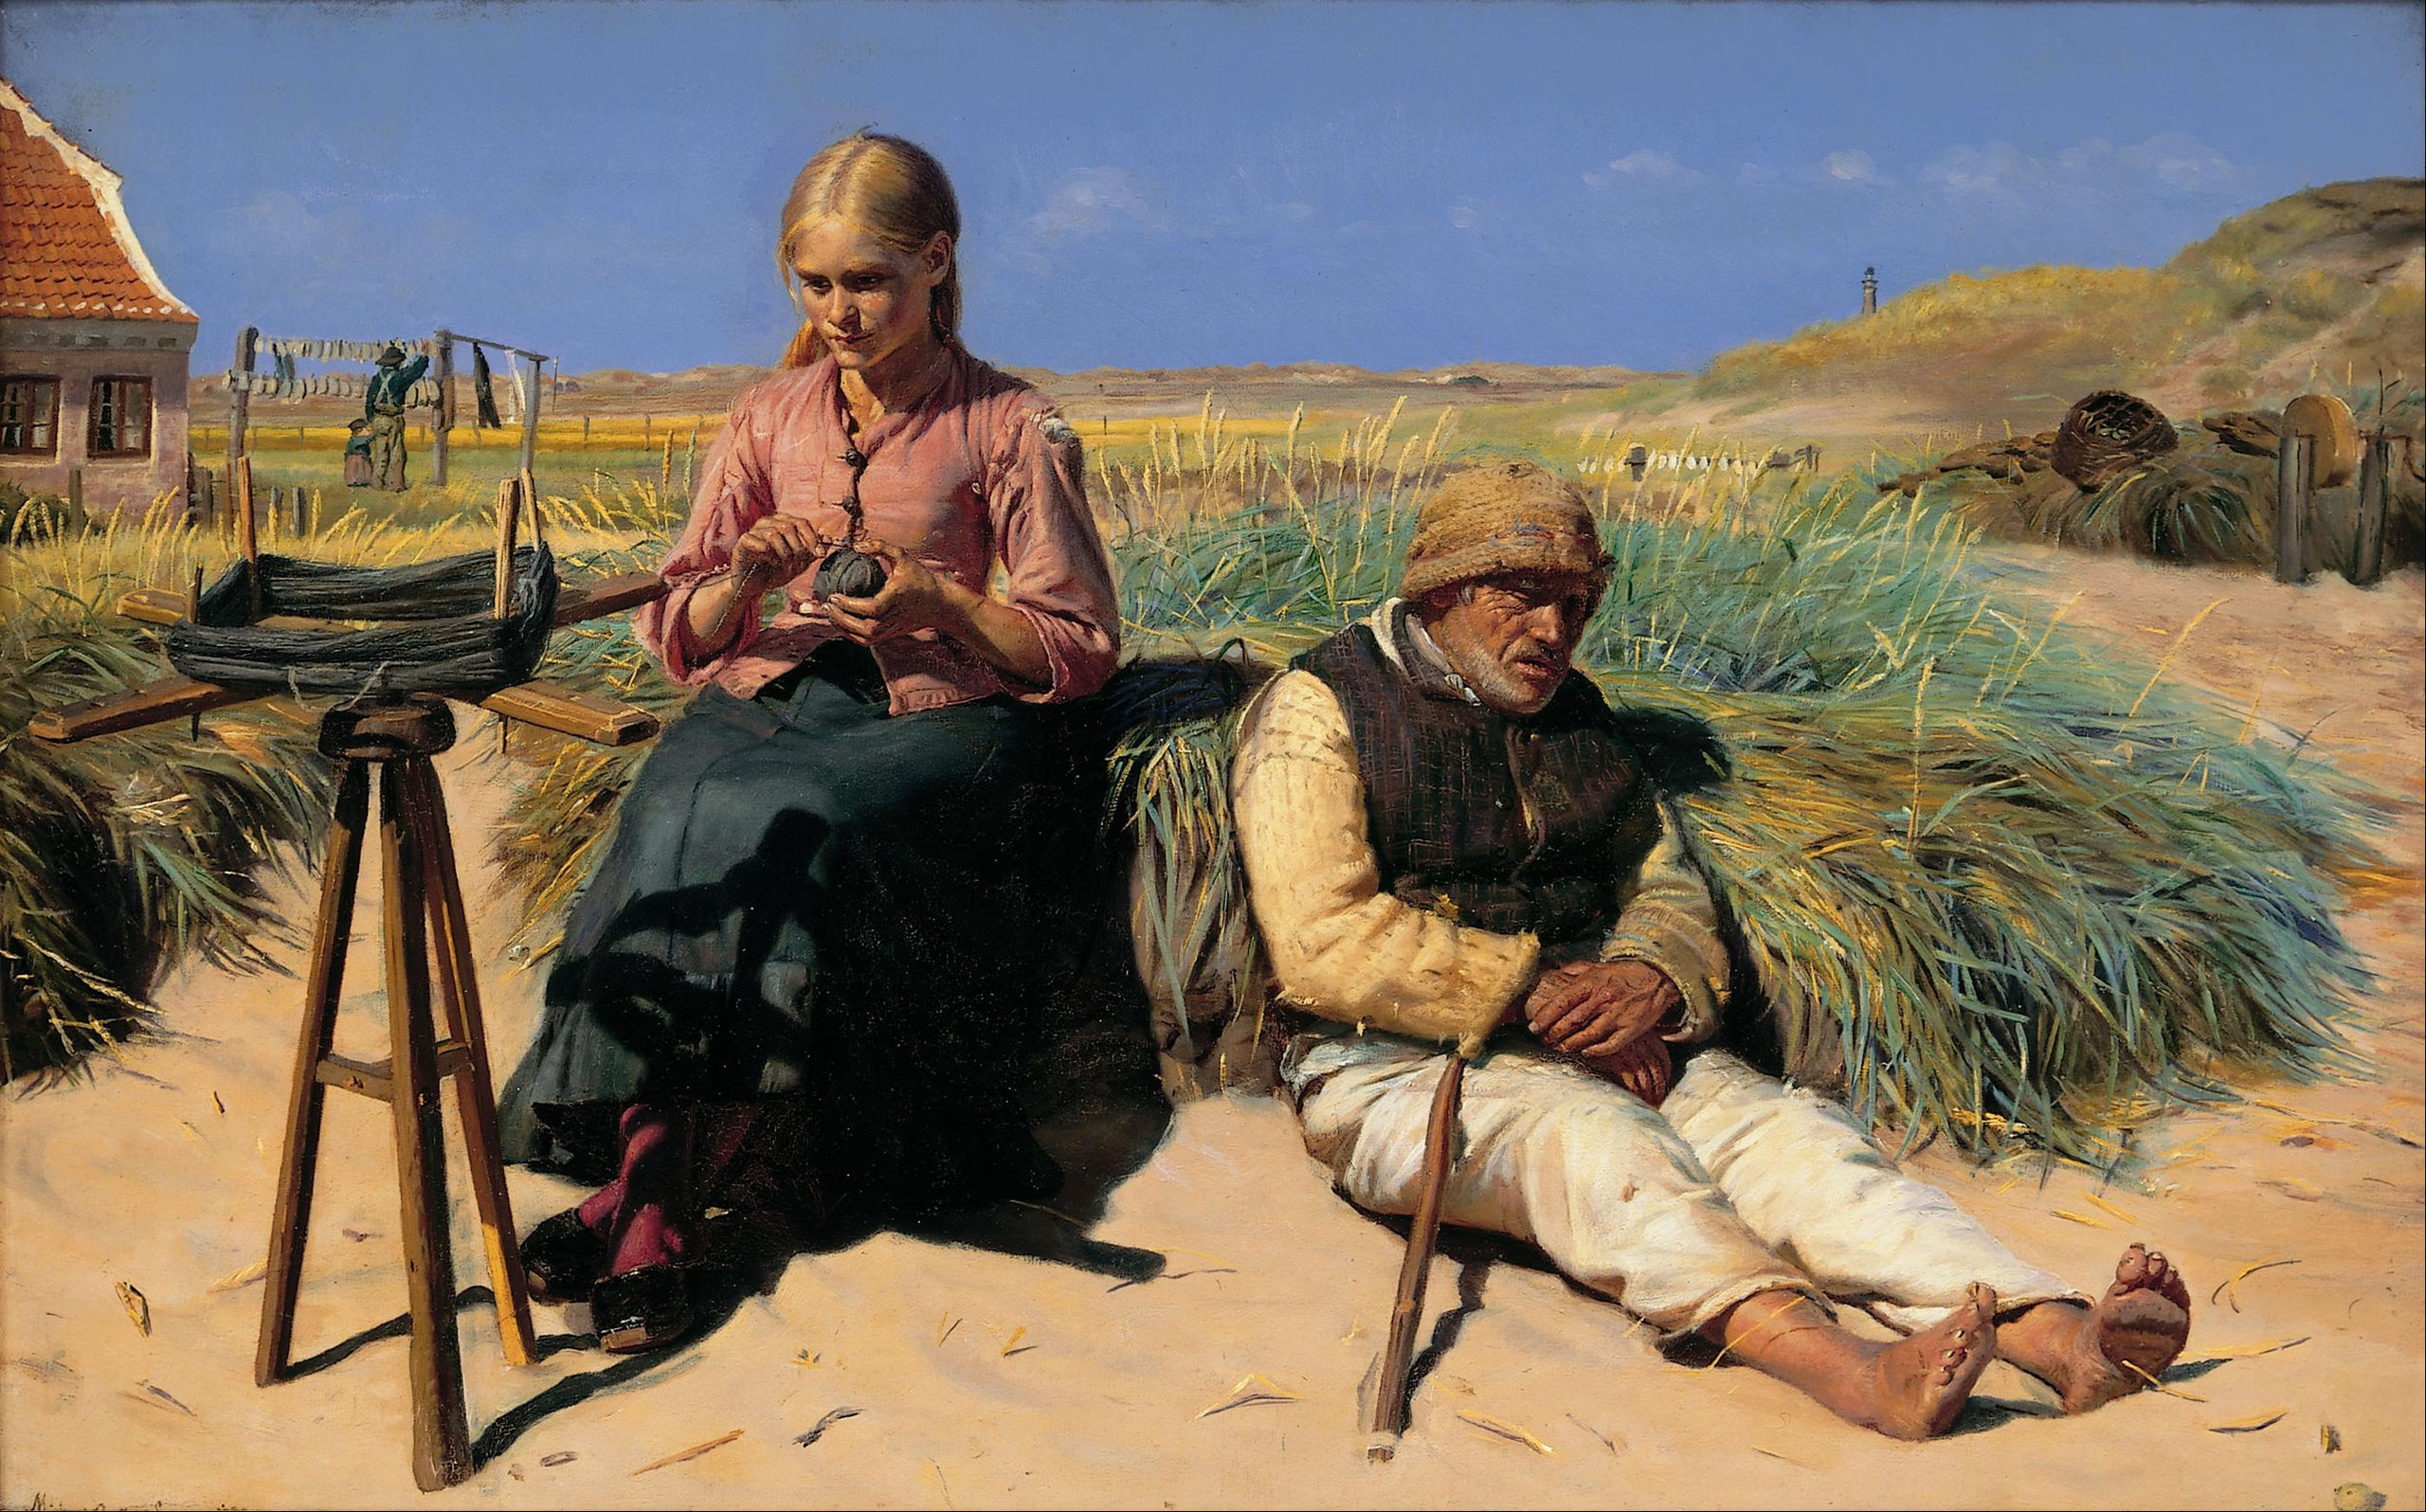 Inspiration: “Among the Dunes,” by Michael Ancher